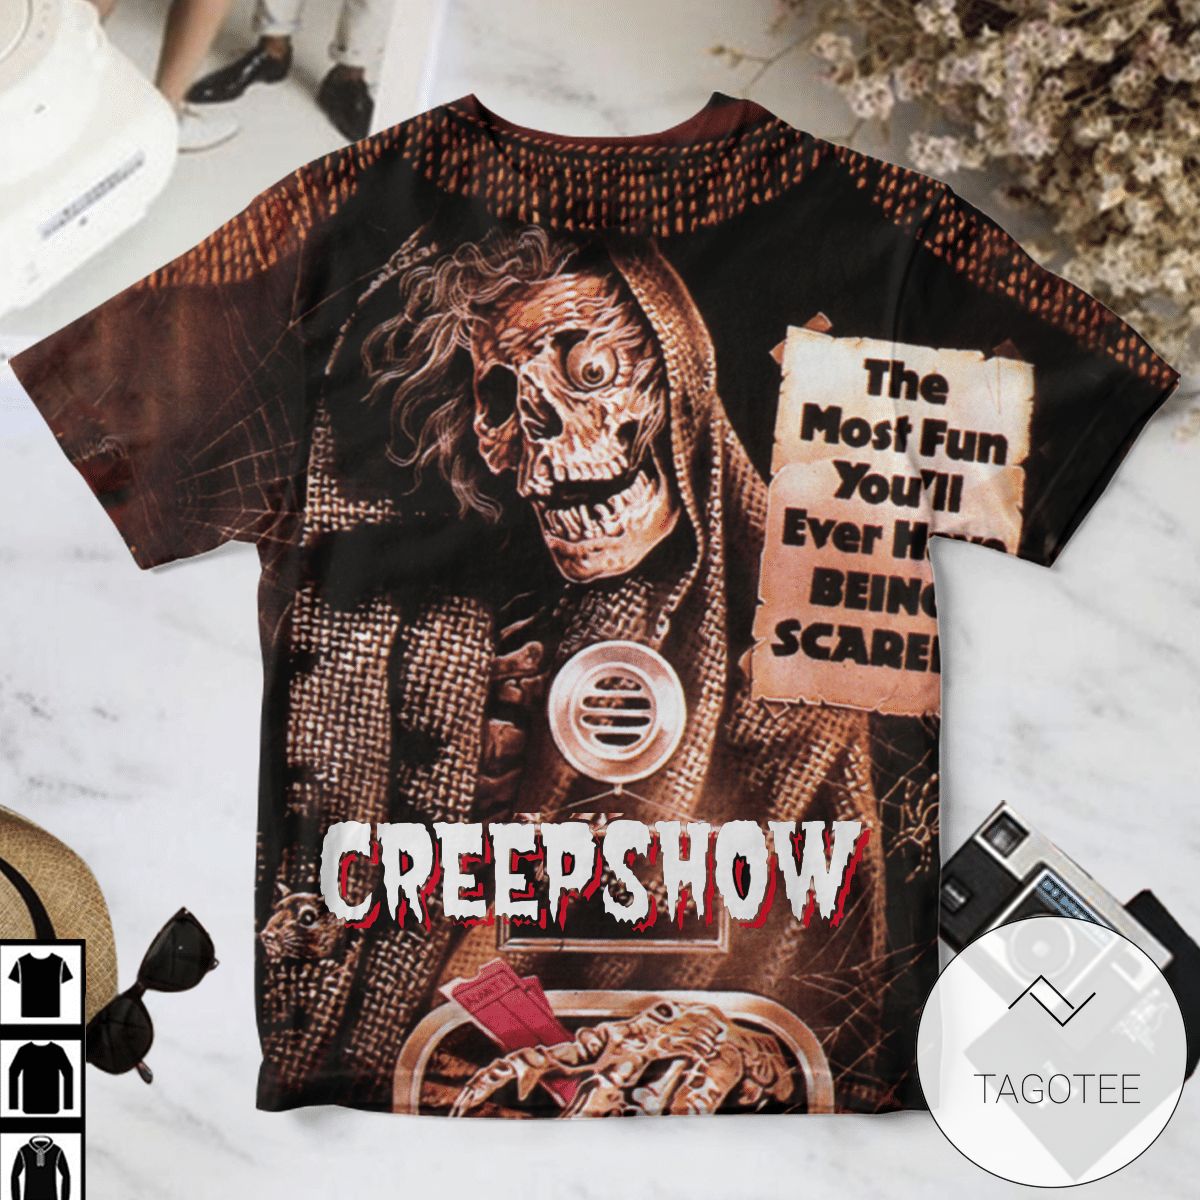 Creepshow The Most Fun You'll Ever Have Being Scared Shirt